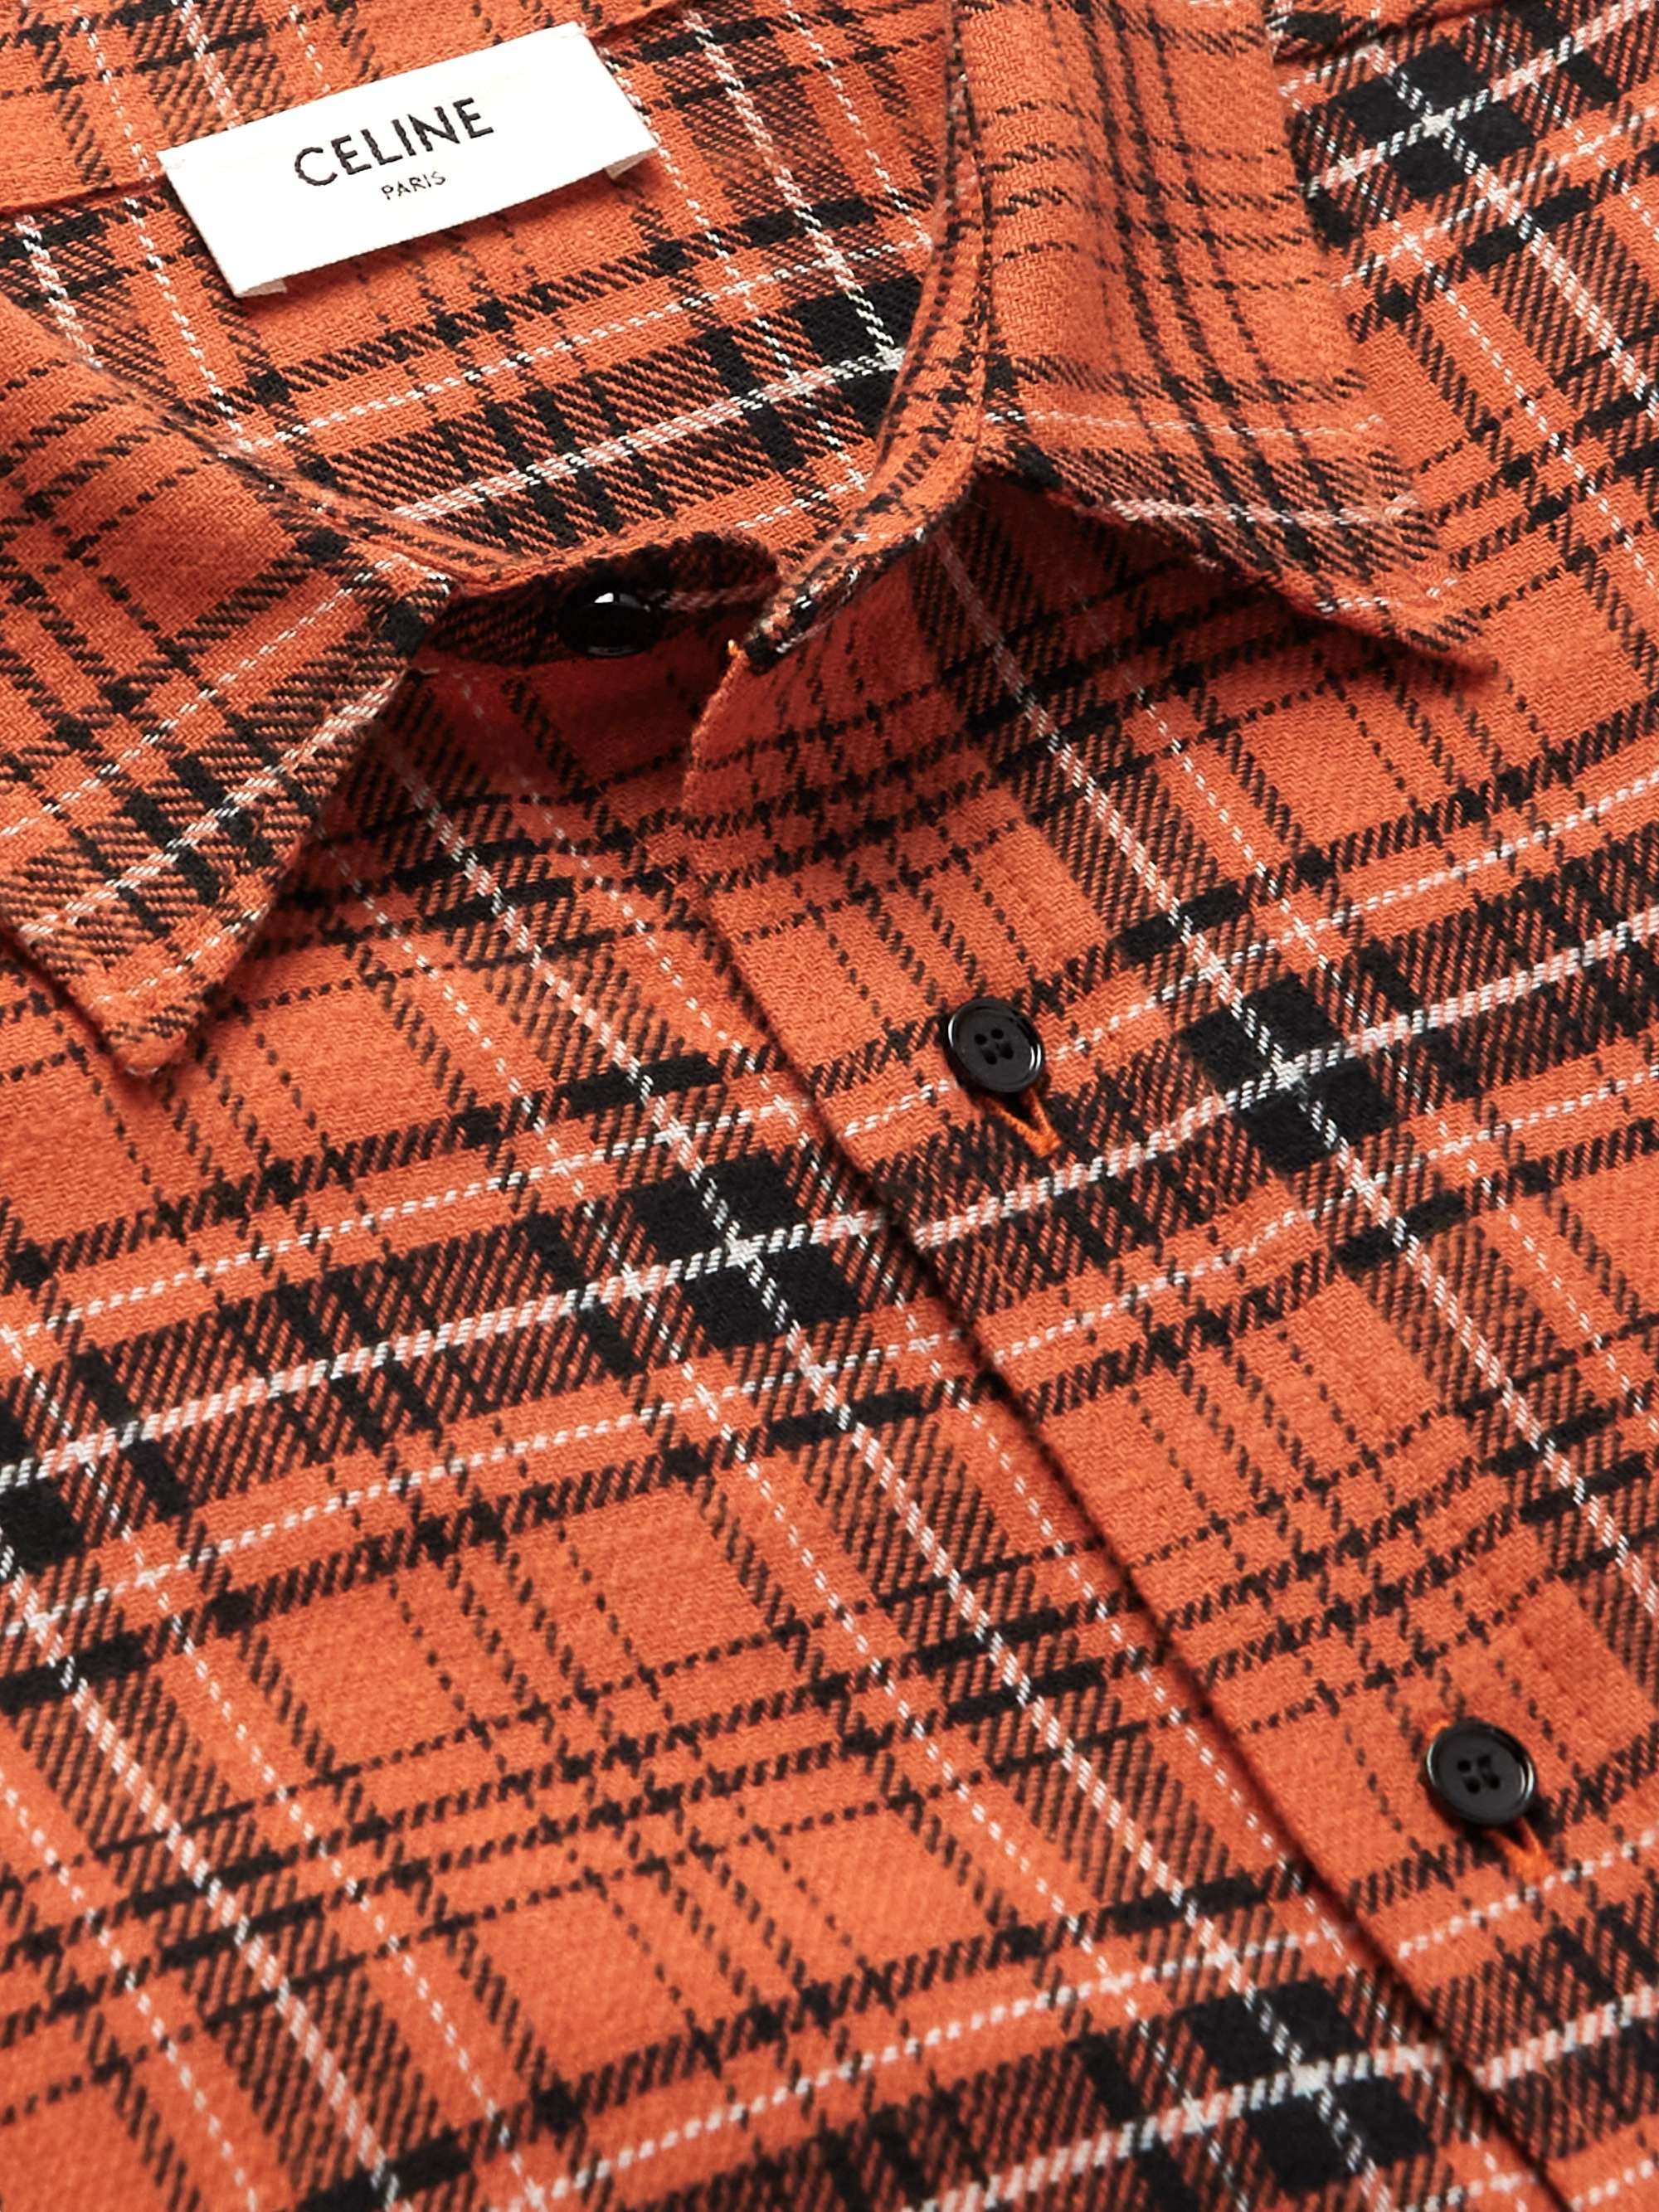 CELINE HOMME Checked Cotton-Flannel Shirt